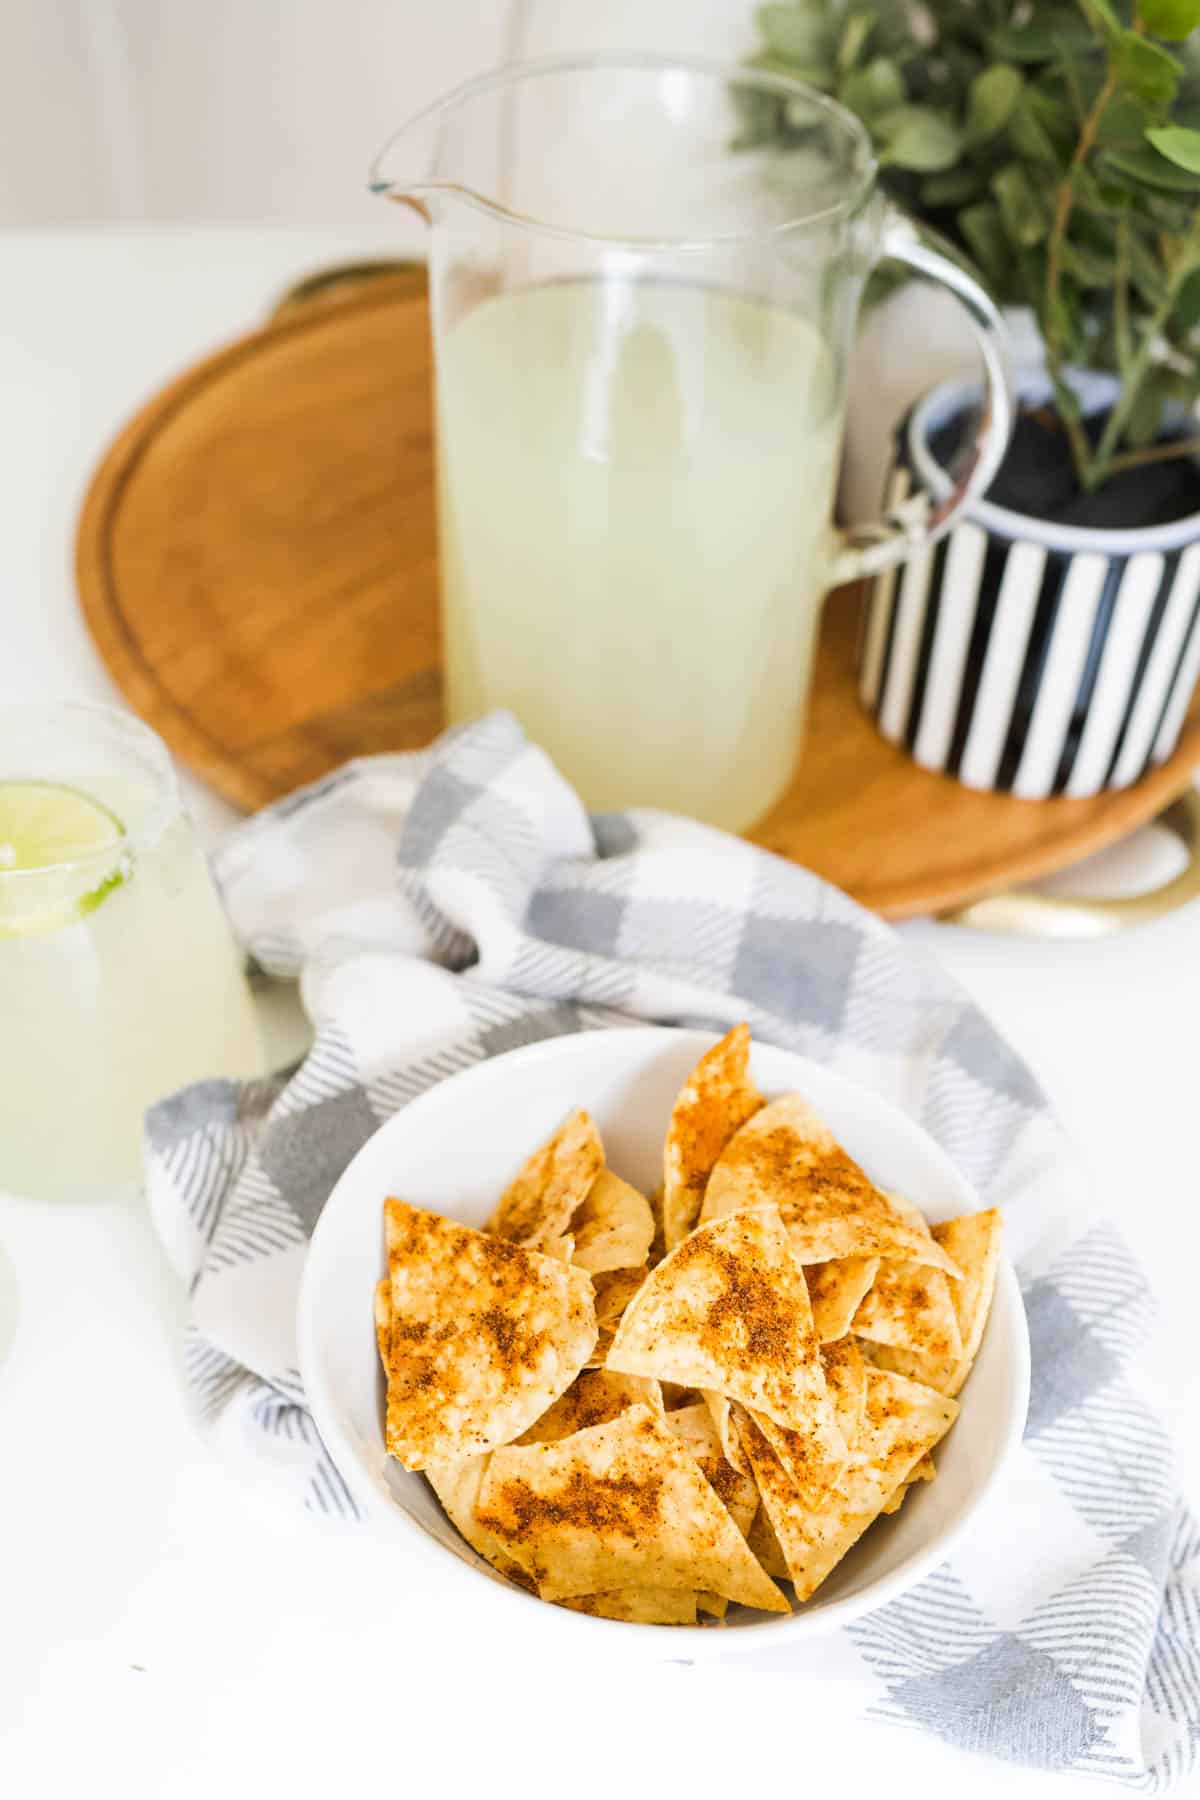 A white bowl filled with spiced tortilla chips on top of a kitchen towel next to a pitcher of lemonade on a wooden tray.